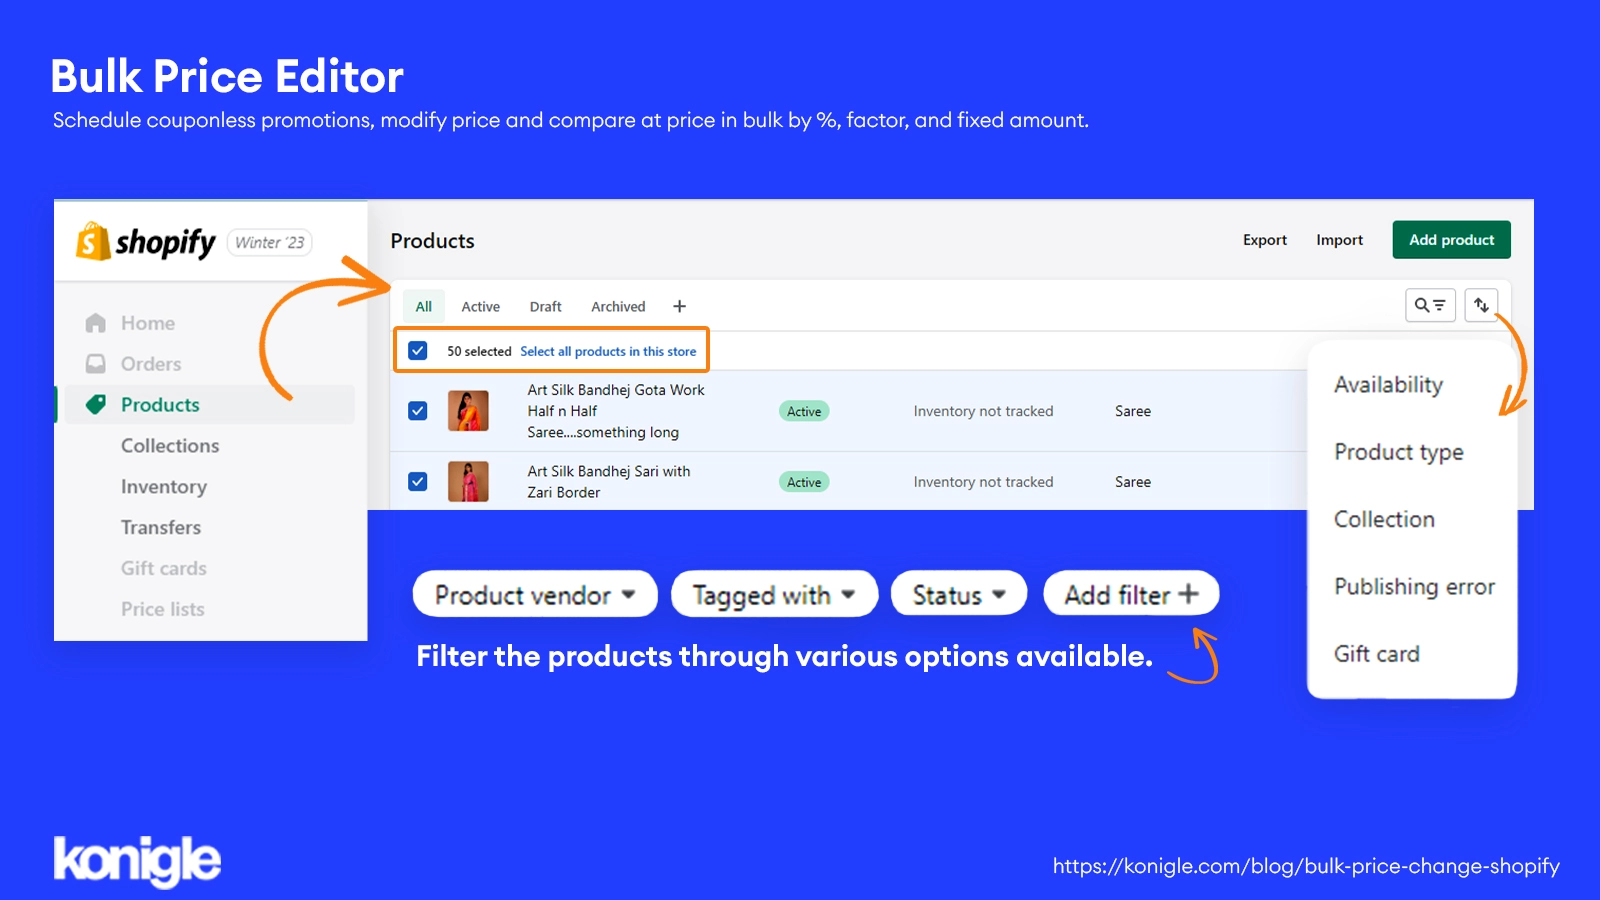 The process of filtering products with various options in shopify admin.